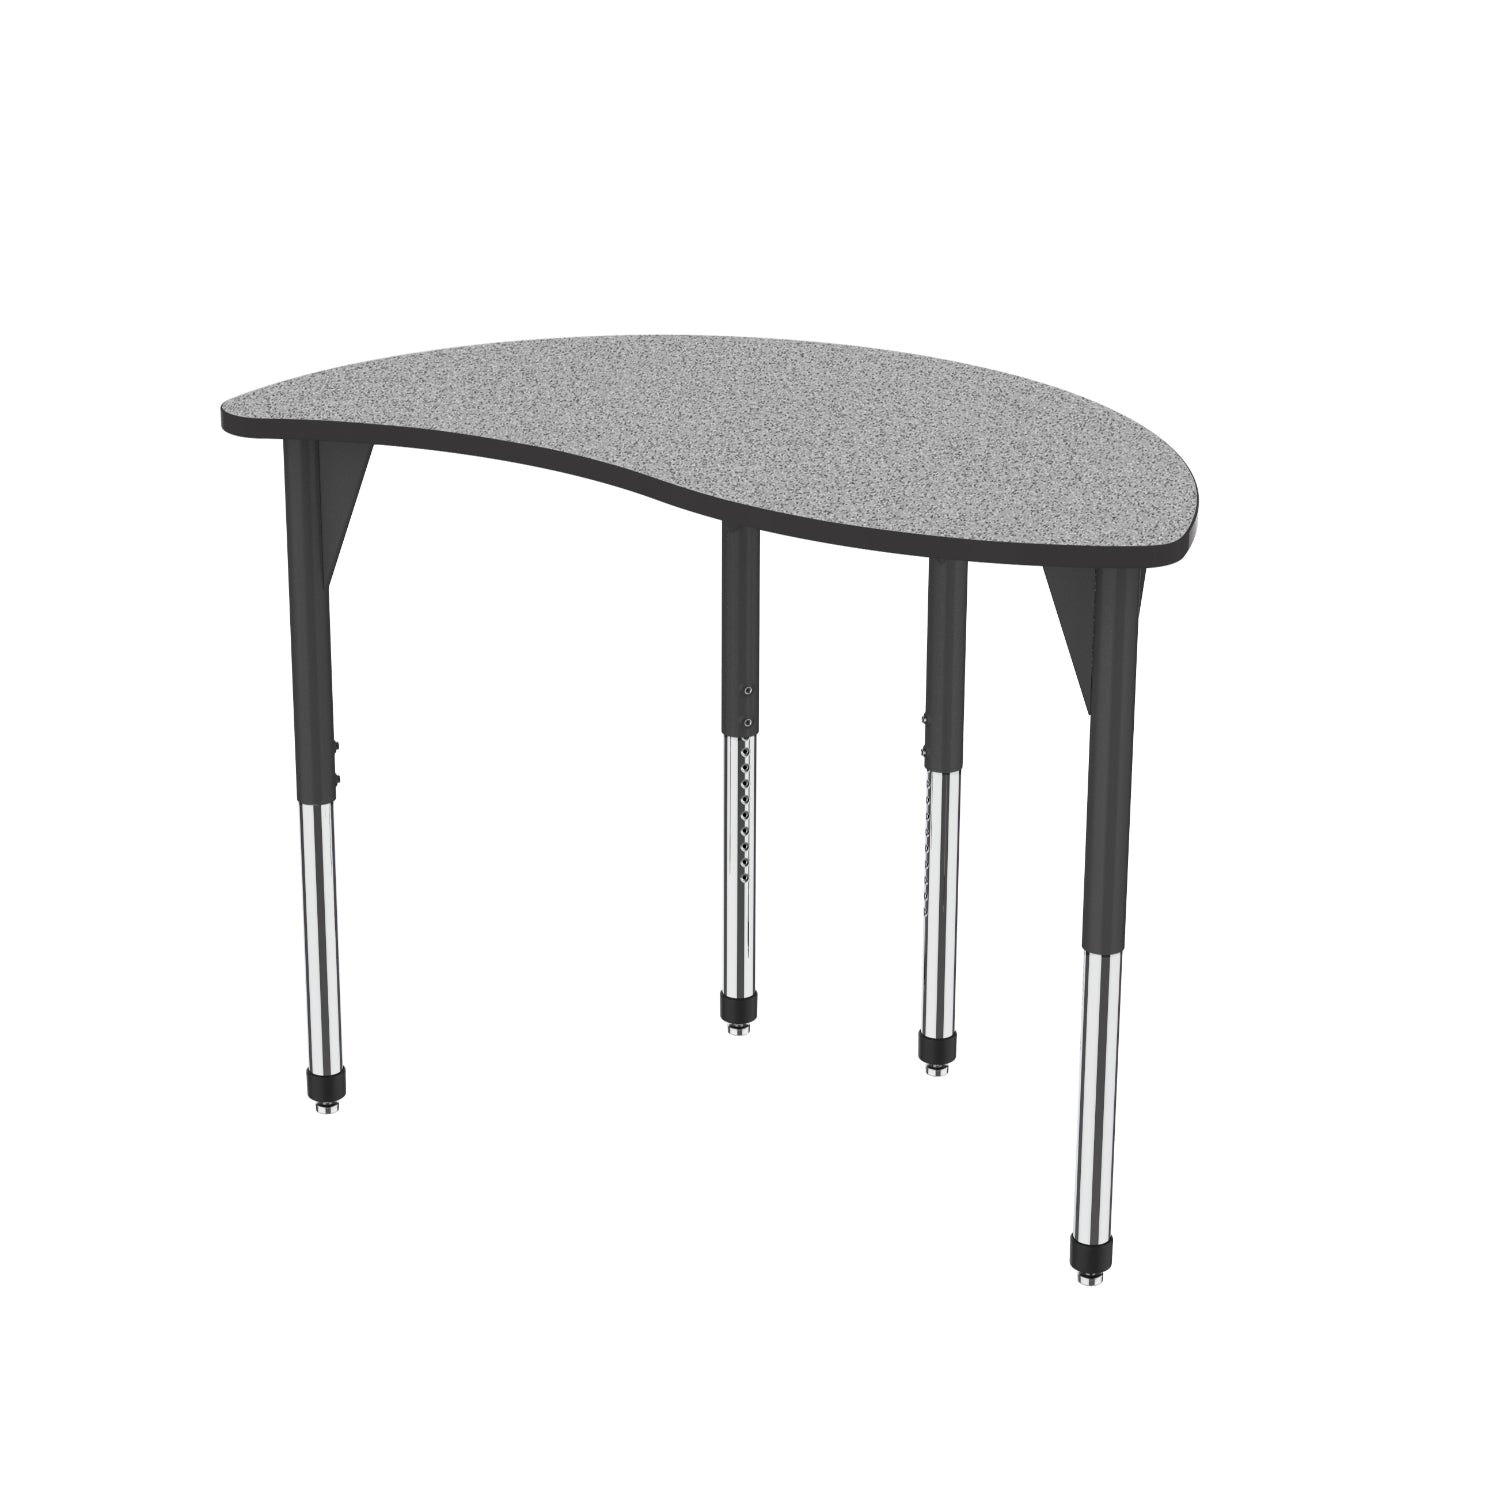 Premier Standing Height Collaborative Classroom Table, 30" x 54" Wave Half Round